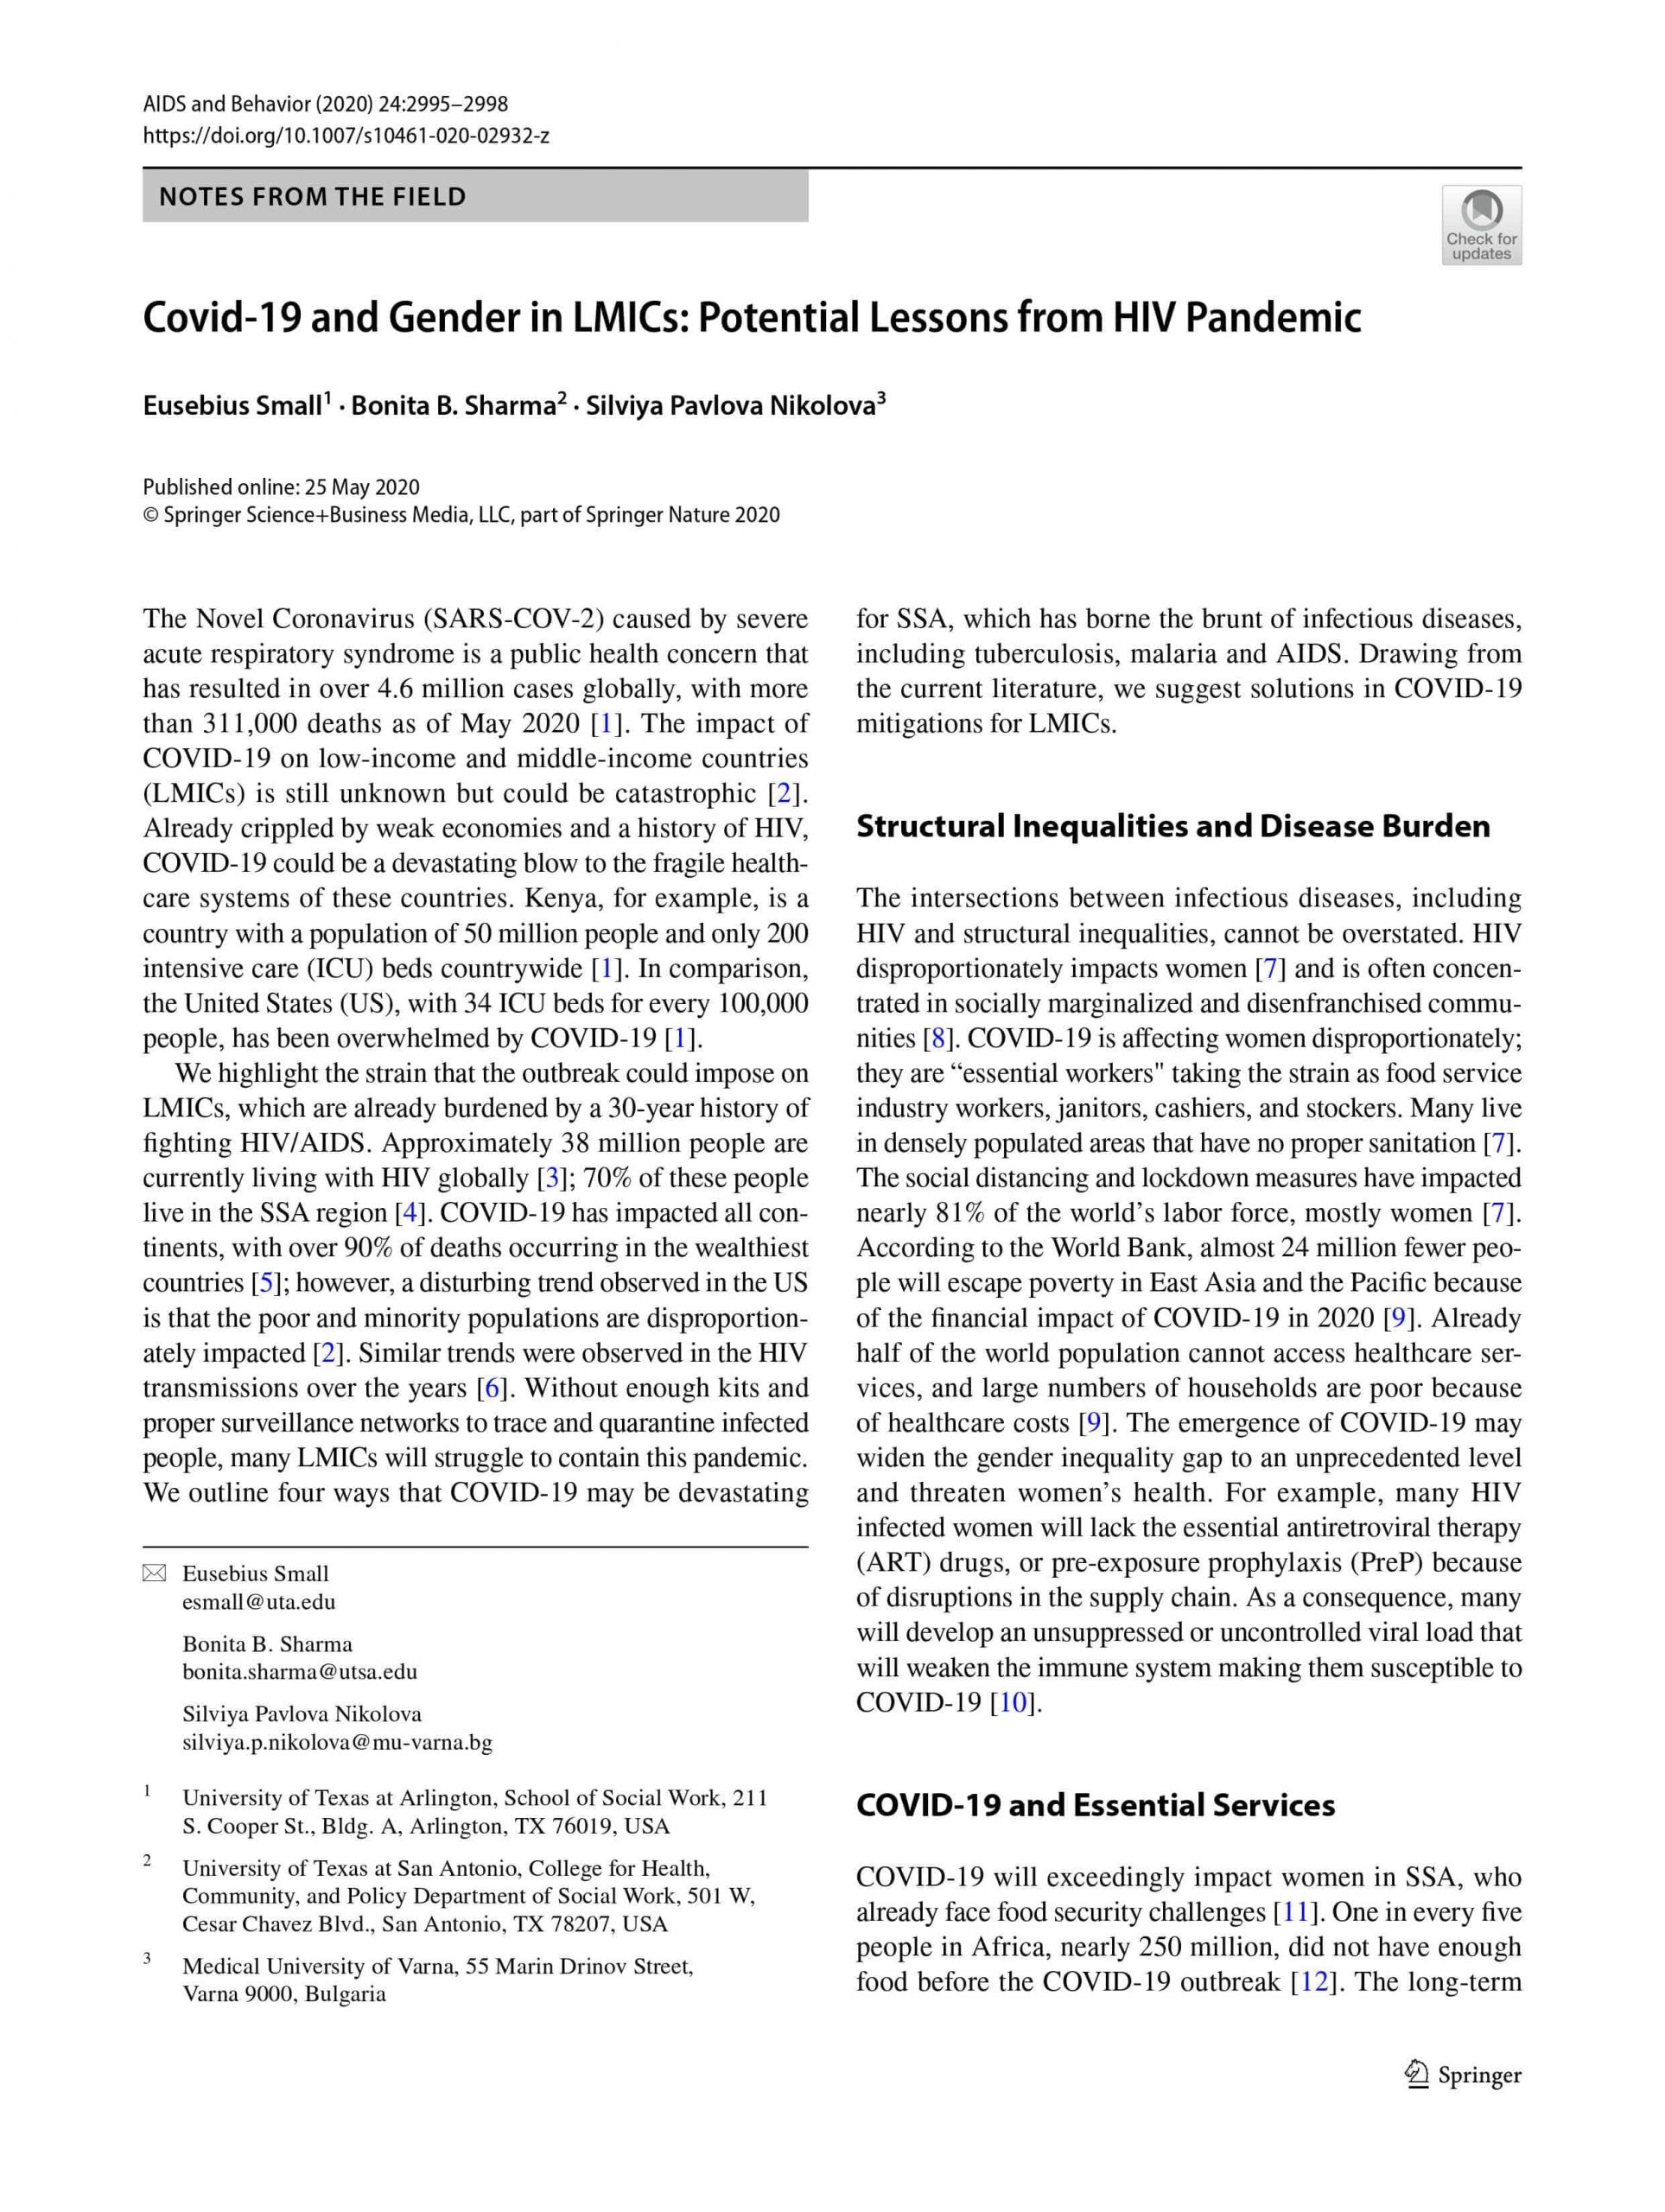 COVID-19 and gender in low-income and middle-income countries: Potential lessons from the HIV pandemic